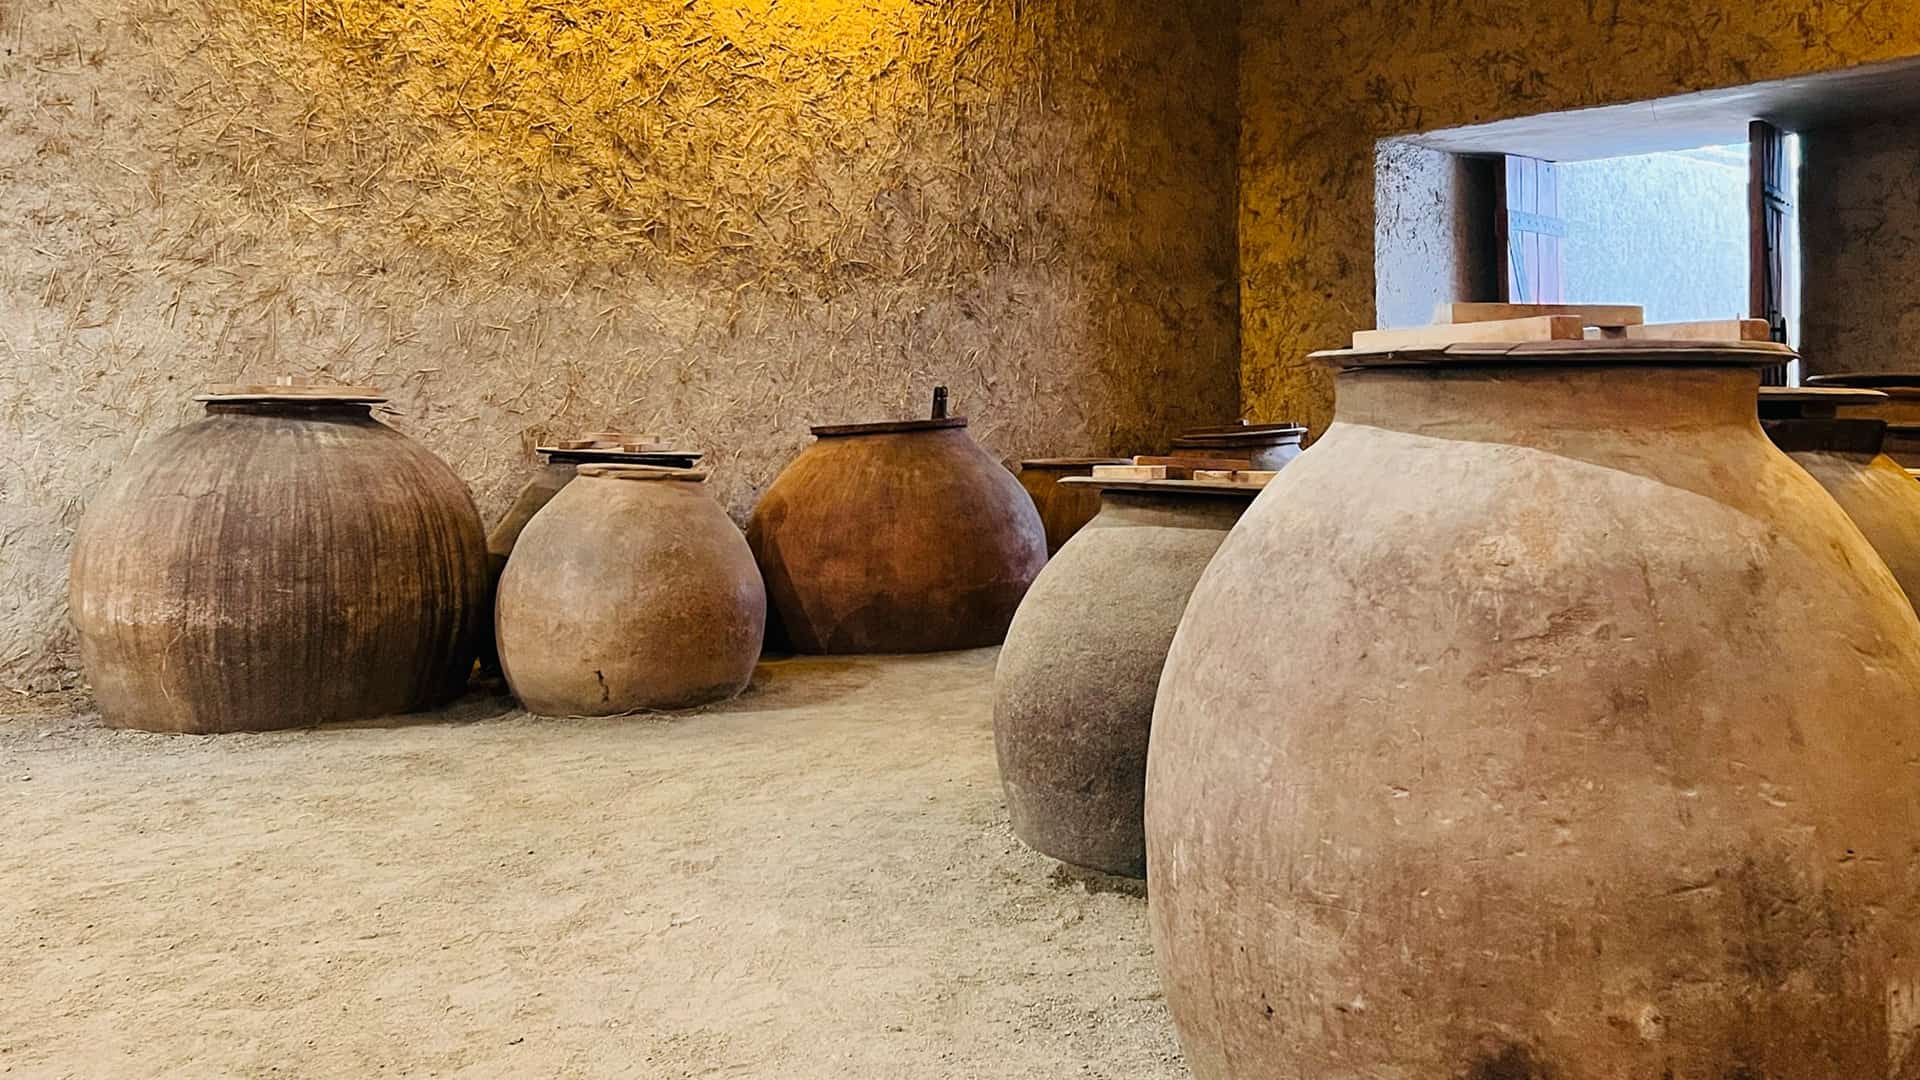 Large clay jars used for storing and fermenting wine